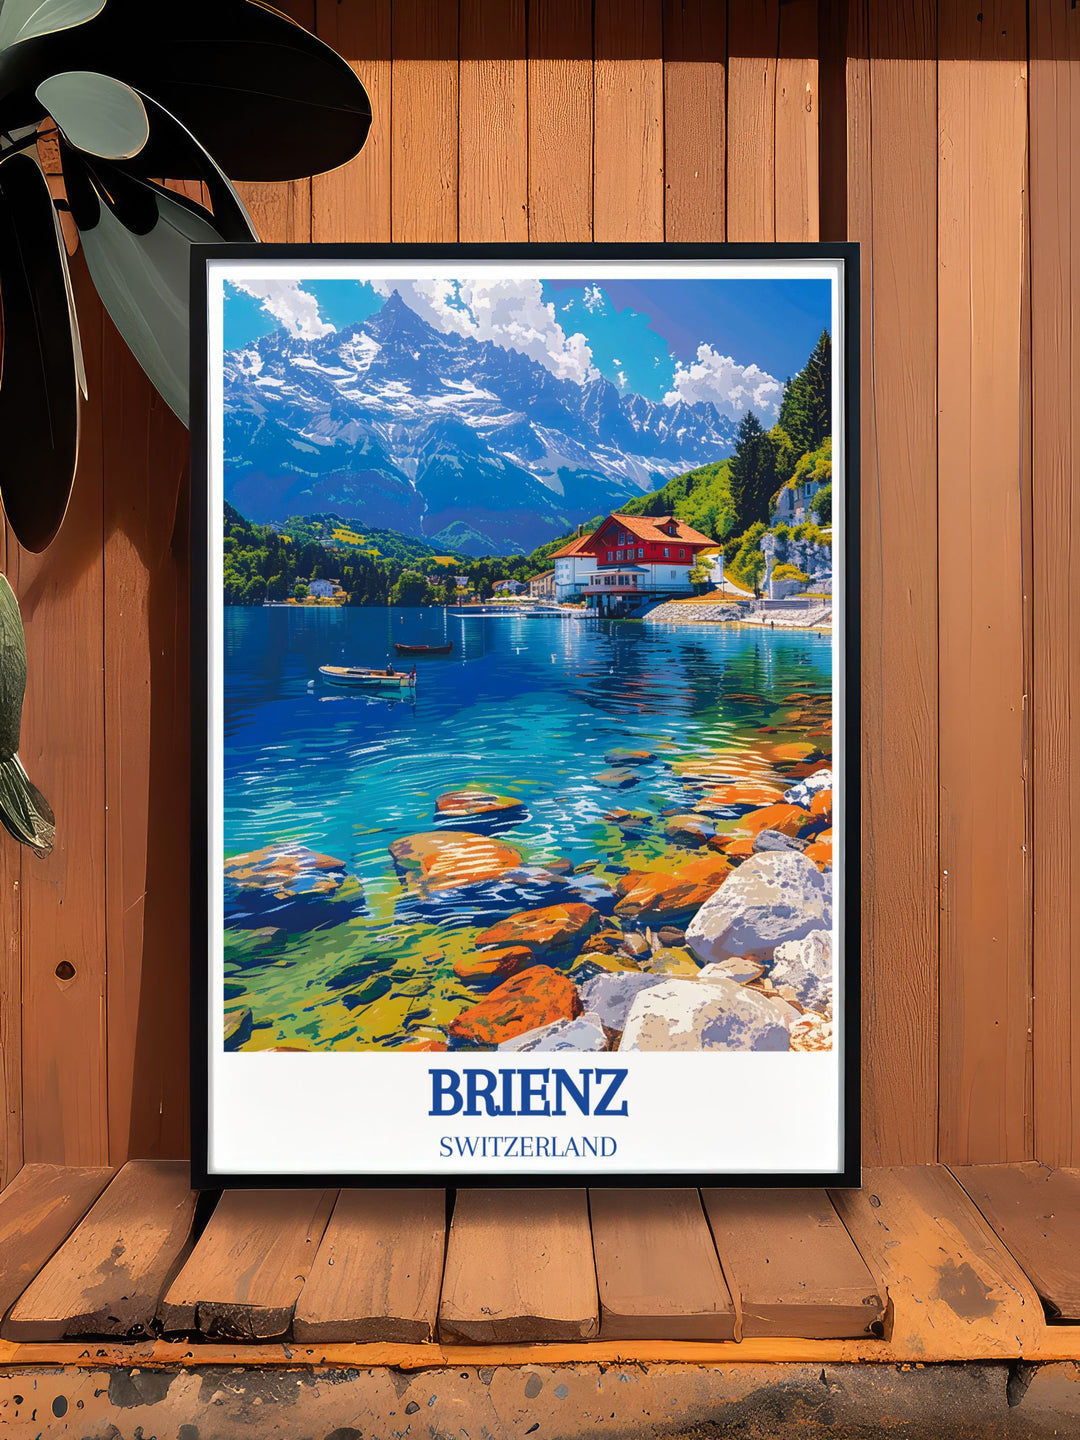 Lauterbrunnen print and Interlaken print with Lake Brienz, Brienzer Rothorn views. High quality framed print ideal for travel lovers and those who appreciate Swiss Alps natural beauty. Great gift option.